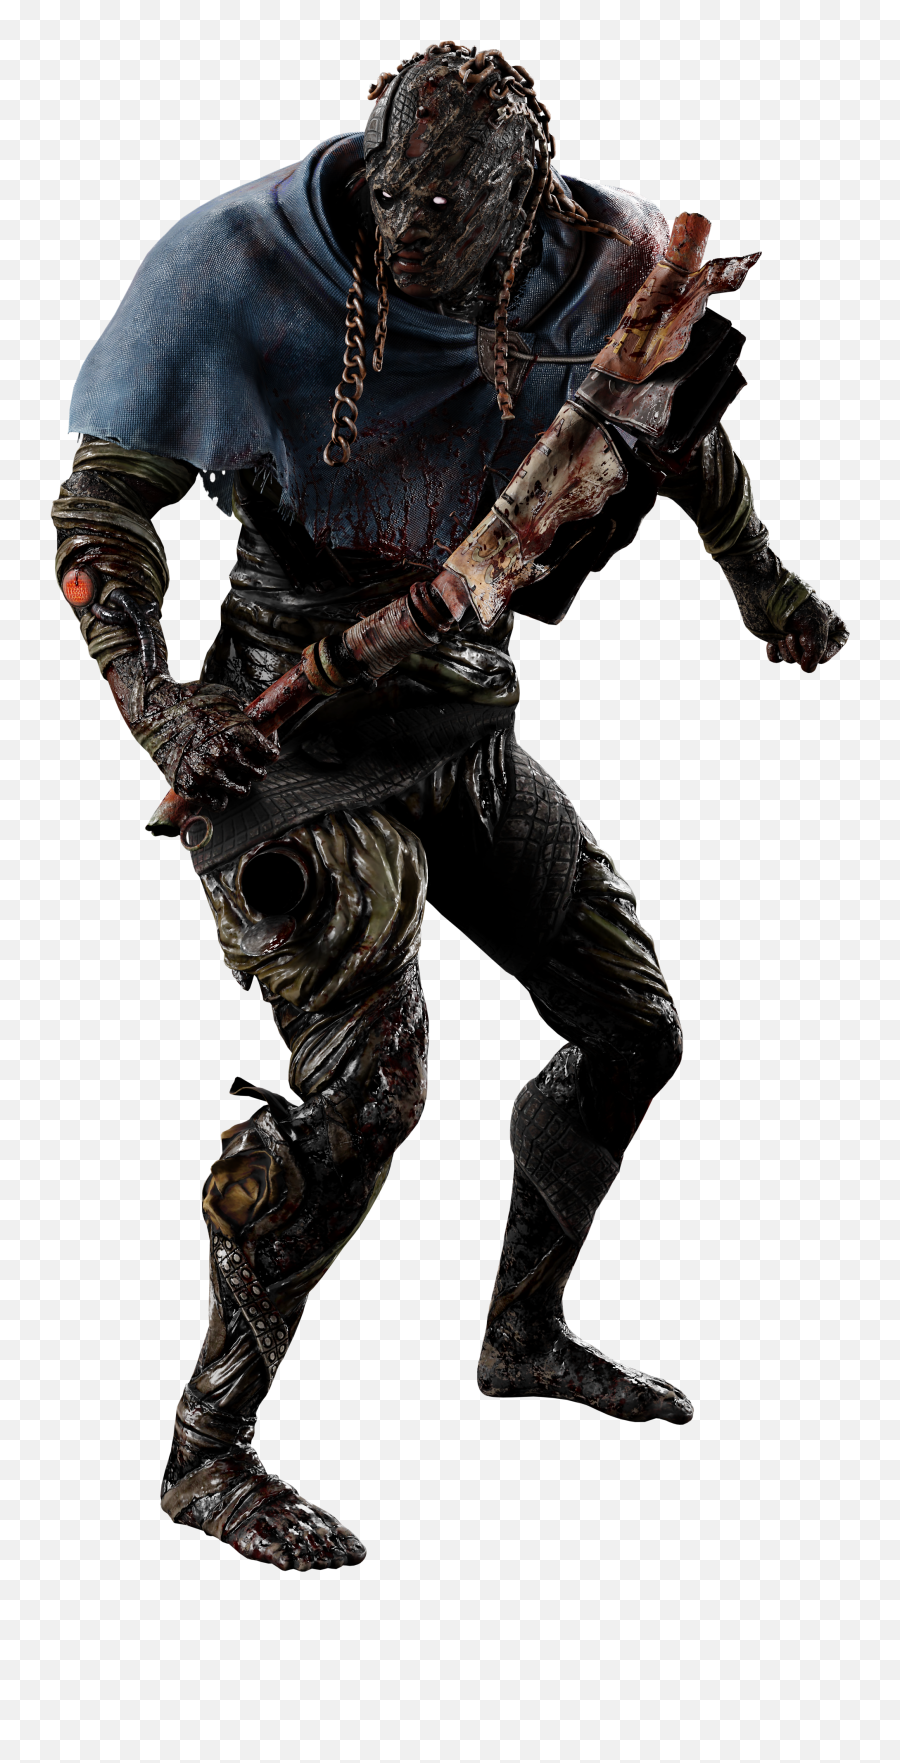 Wraith With Chain Braids 4k Render - Resident Evil Umbrella Corps Artwork Png,Wraith Png